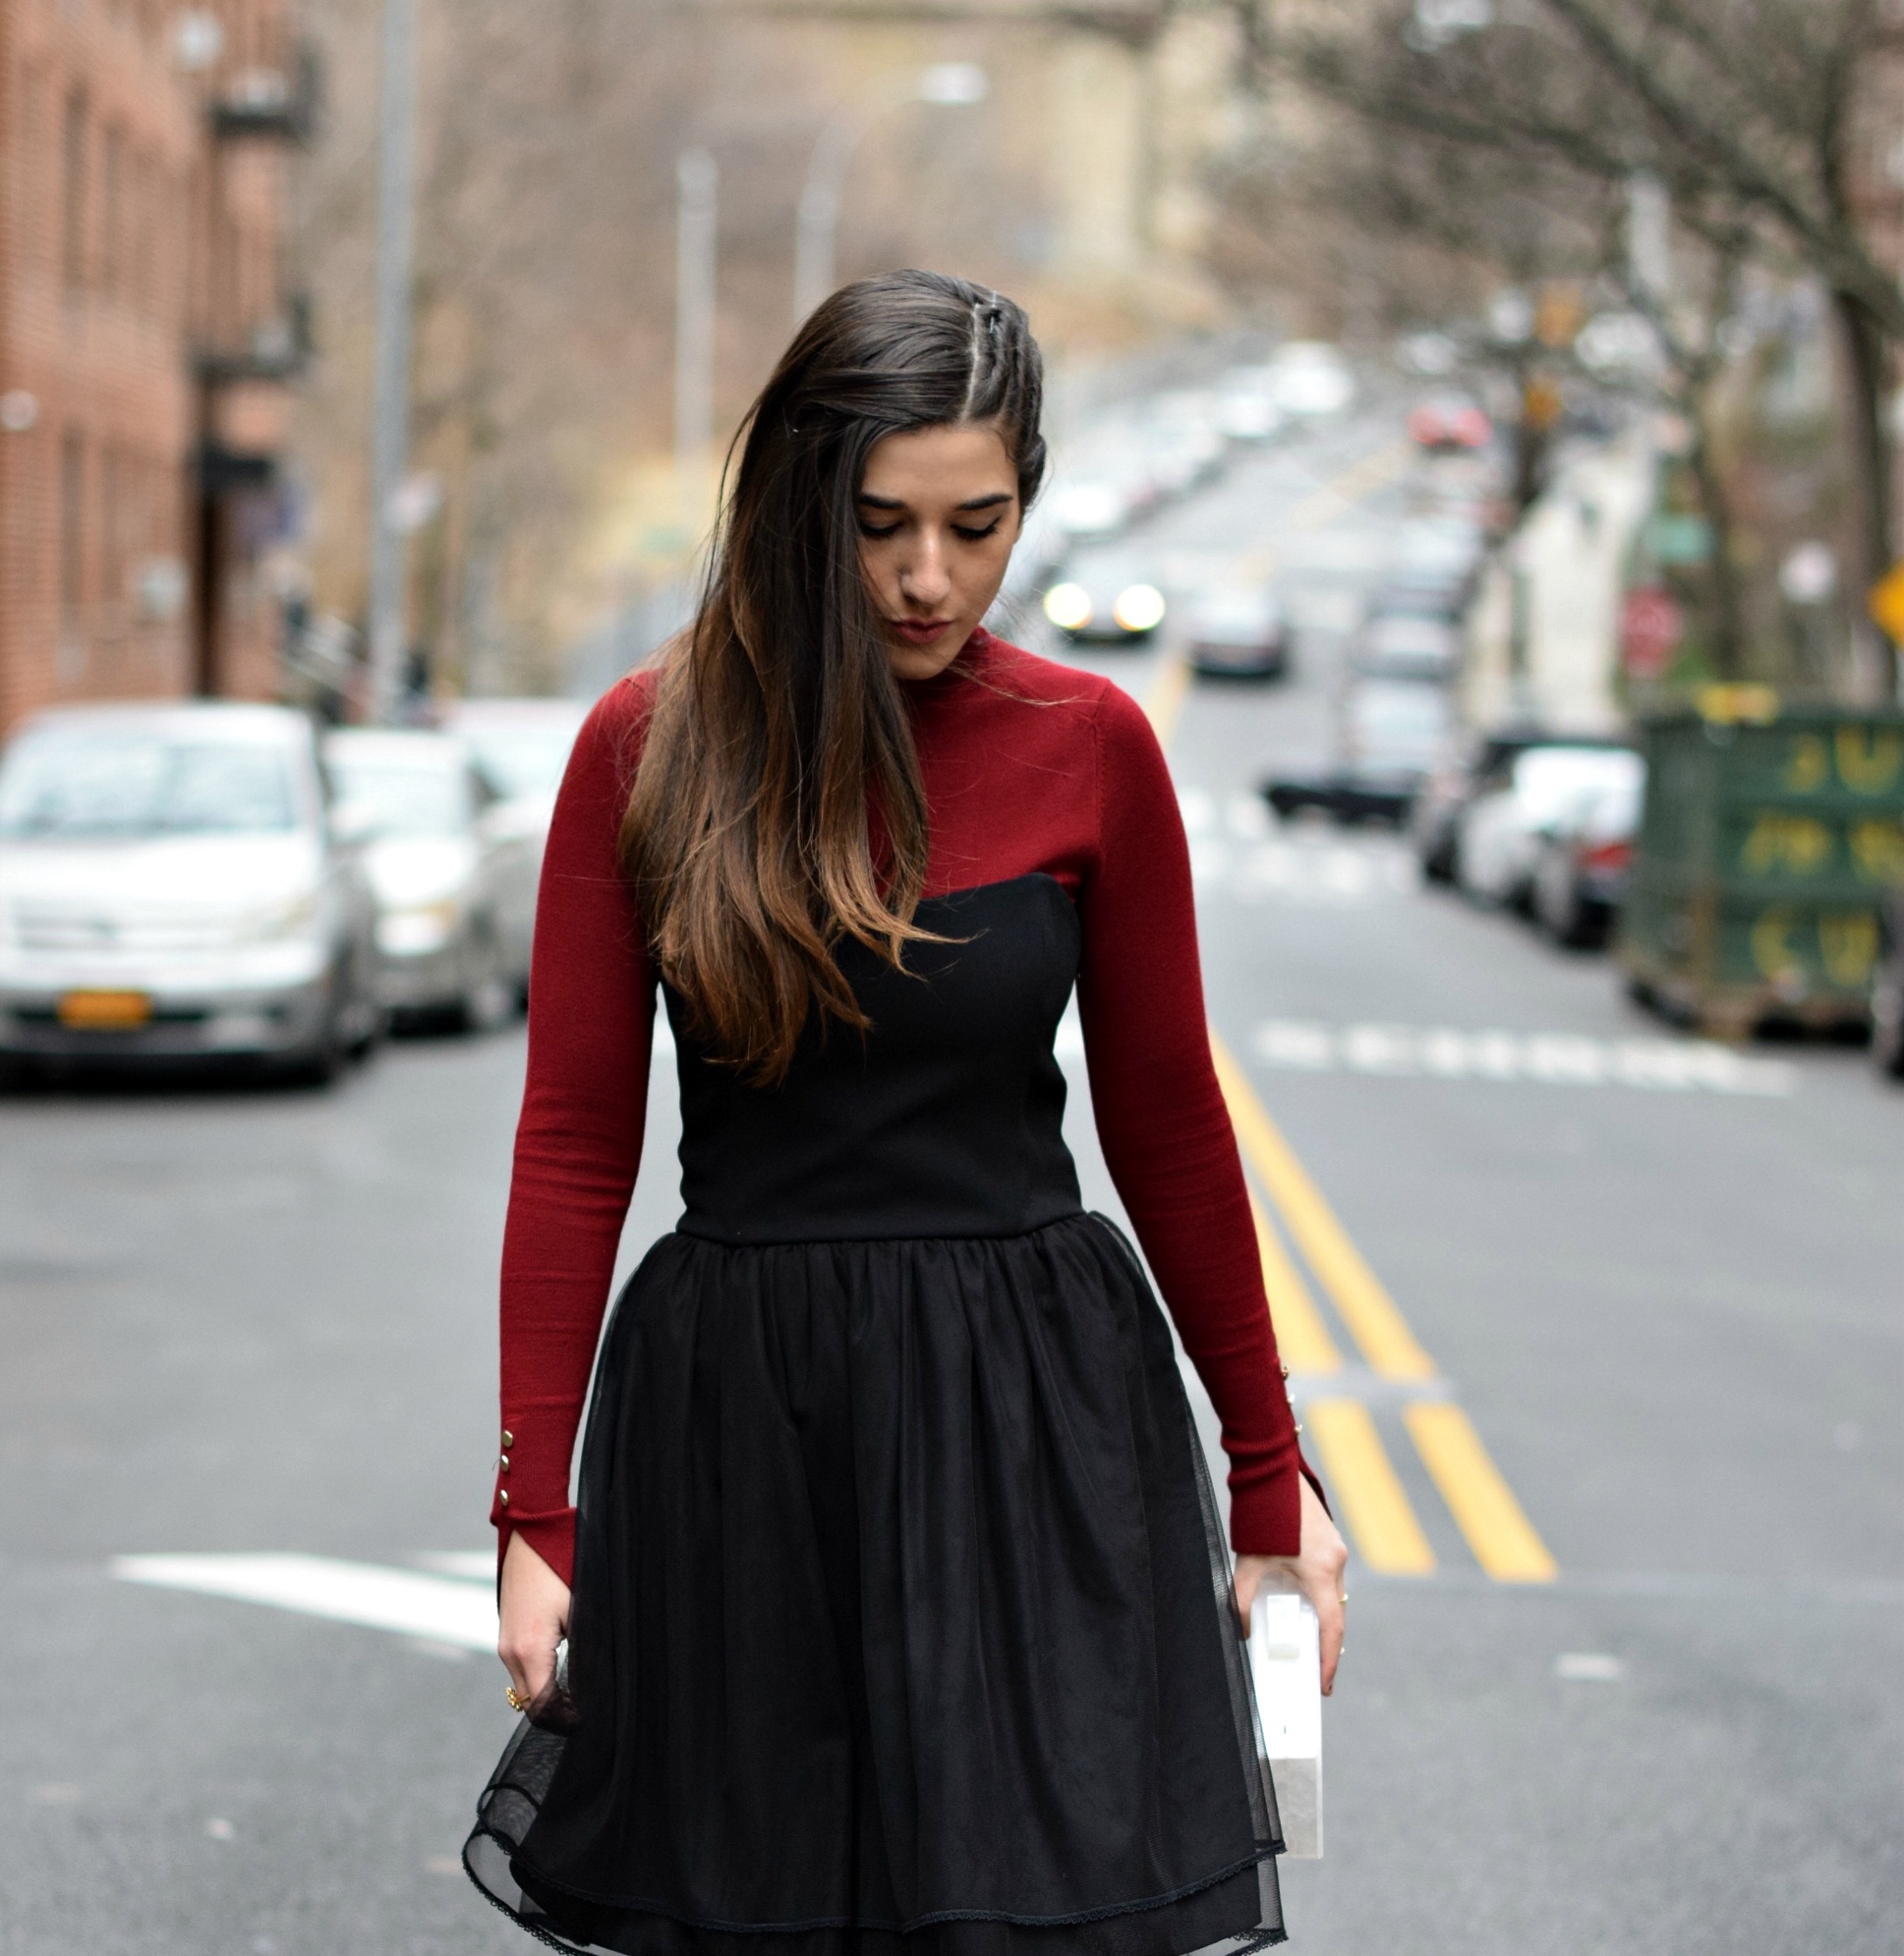 Red Turtleneck Under Strapless Dress Louboutins & Love Fashion Blog Esther Santer NYC Street Style Blogger Black Tights Name Monogrammed Clutch Hair Beautiful Inspo Model Photoshoot Shoes Heels Zara Outfit OOTD Girl Women Shopping Winter New York City.jpg